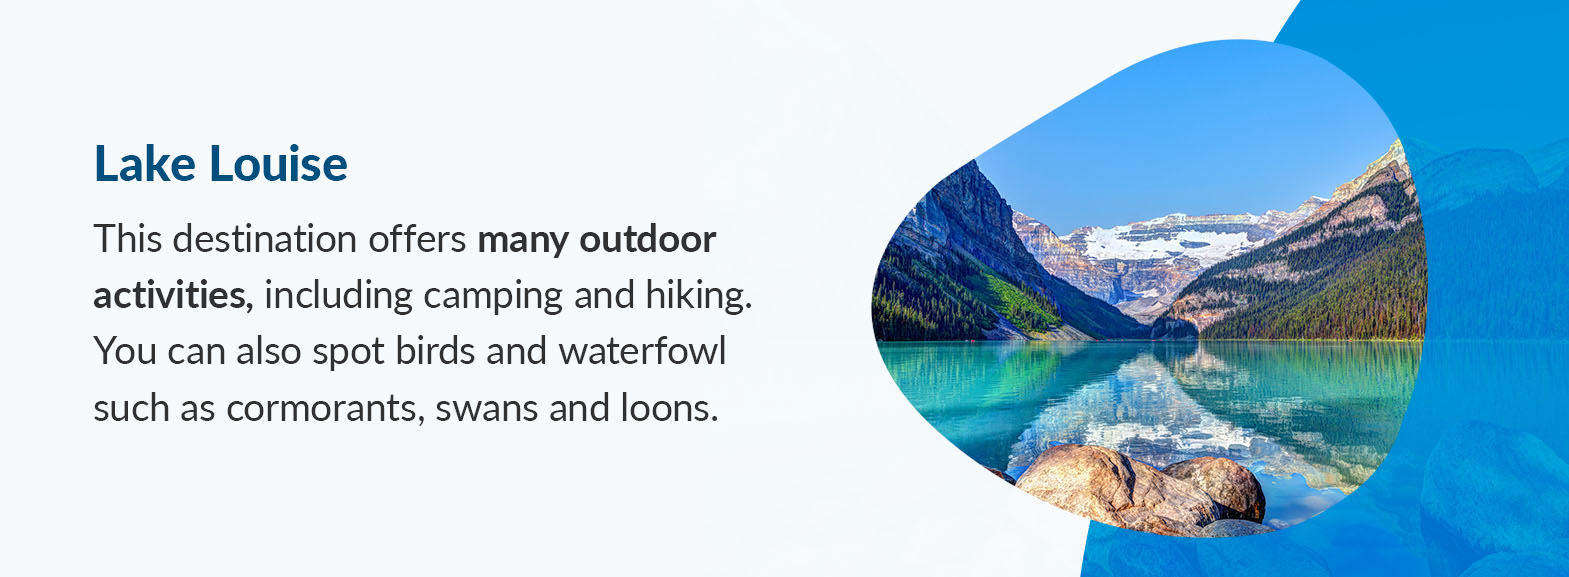 Lake Louise - This destination offers many outdoor activities, including camping and hiking. You can also spot birds and waterfowl such as cormorants, swans and loons.